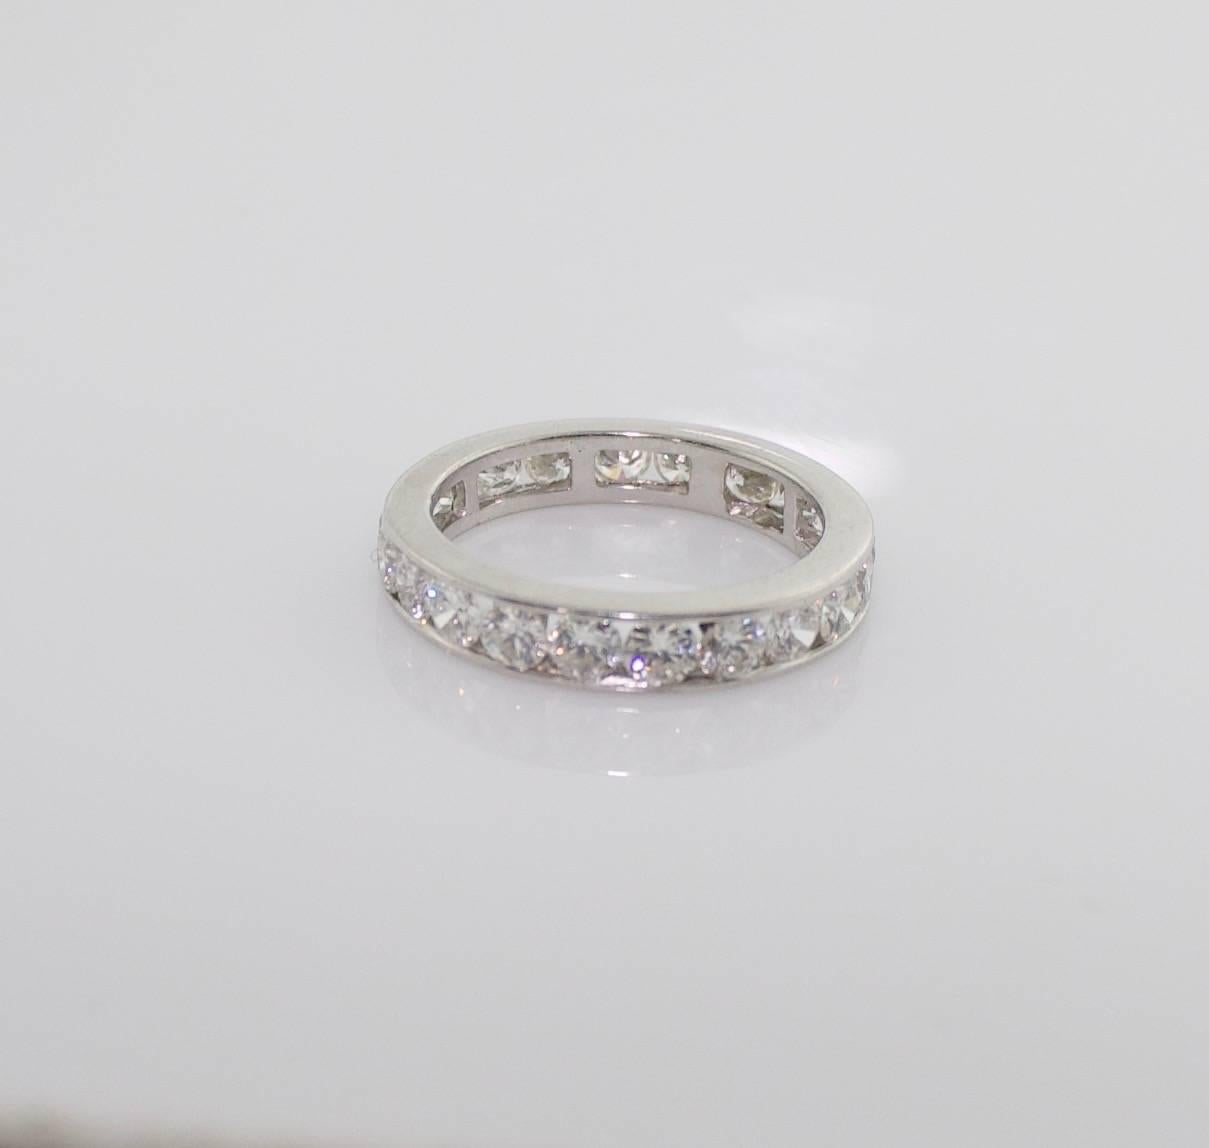 The Classic Eternity Band 18k White Gold Diamond Ring 2.70 carats size 6 1/2
Twenty Two Round Brilliant Cut Diamonds weighing 2.70 carats approximately
Really Nice Quality All Around  GH  VVS-VS2
Size 6 1/2
